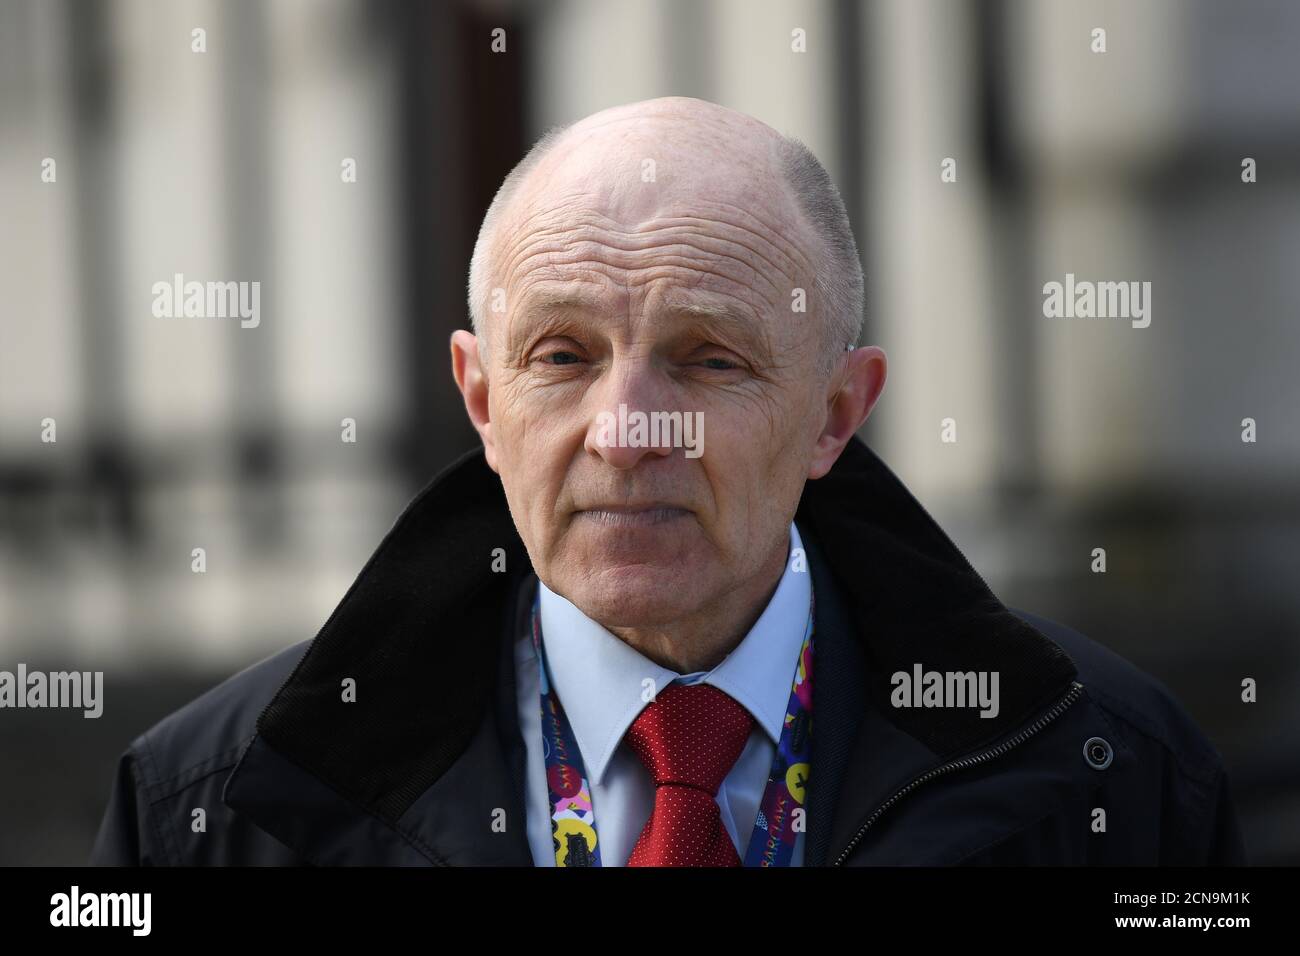 Michael Wardlow Chief Commissioner of the Equality Commission arrives at a Supreme Court hearing in Laganside courts in Belfast, Northern Ireland, May 2, 2018. REUTERS/Clodagh Kilcoyne Stock Photo